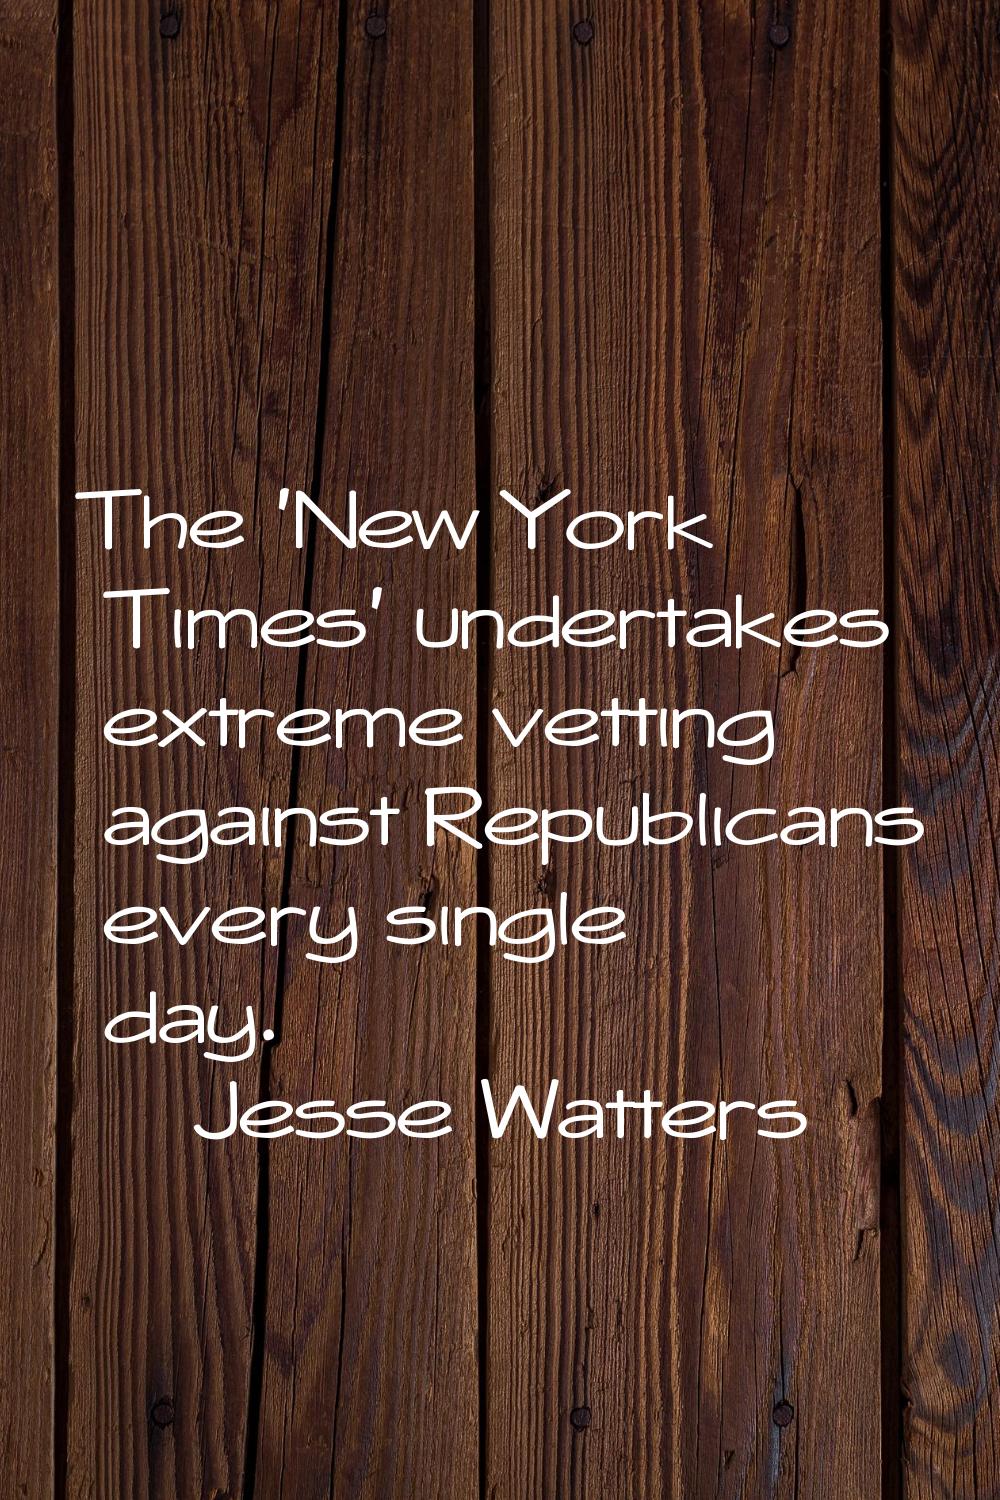 The 'New York Times' undertakes extreme vetting against Republicans every single day.